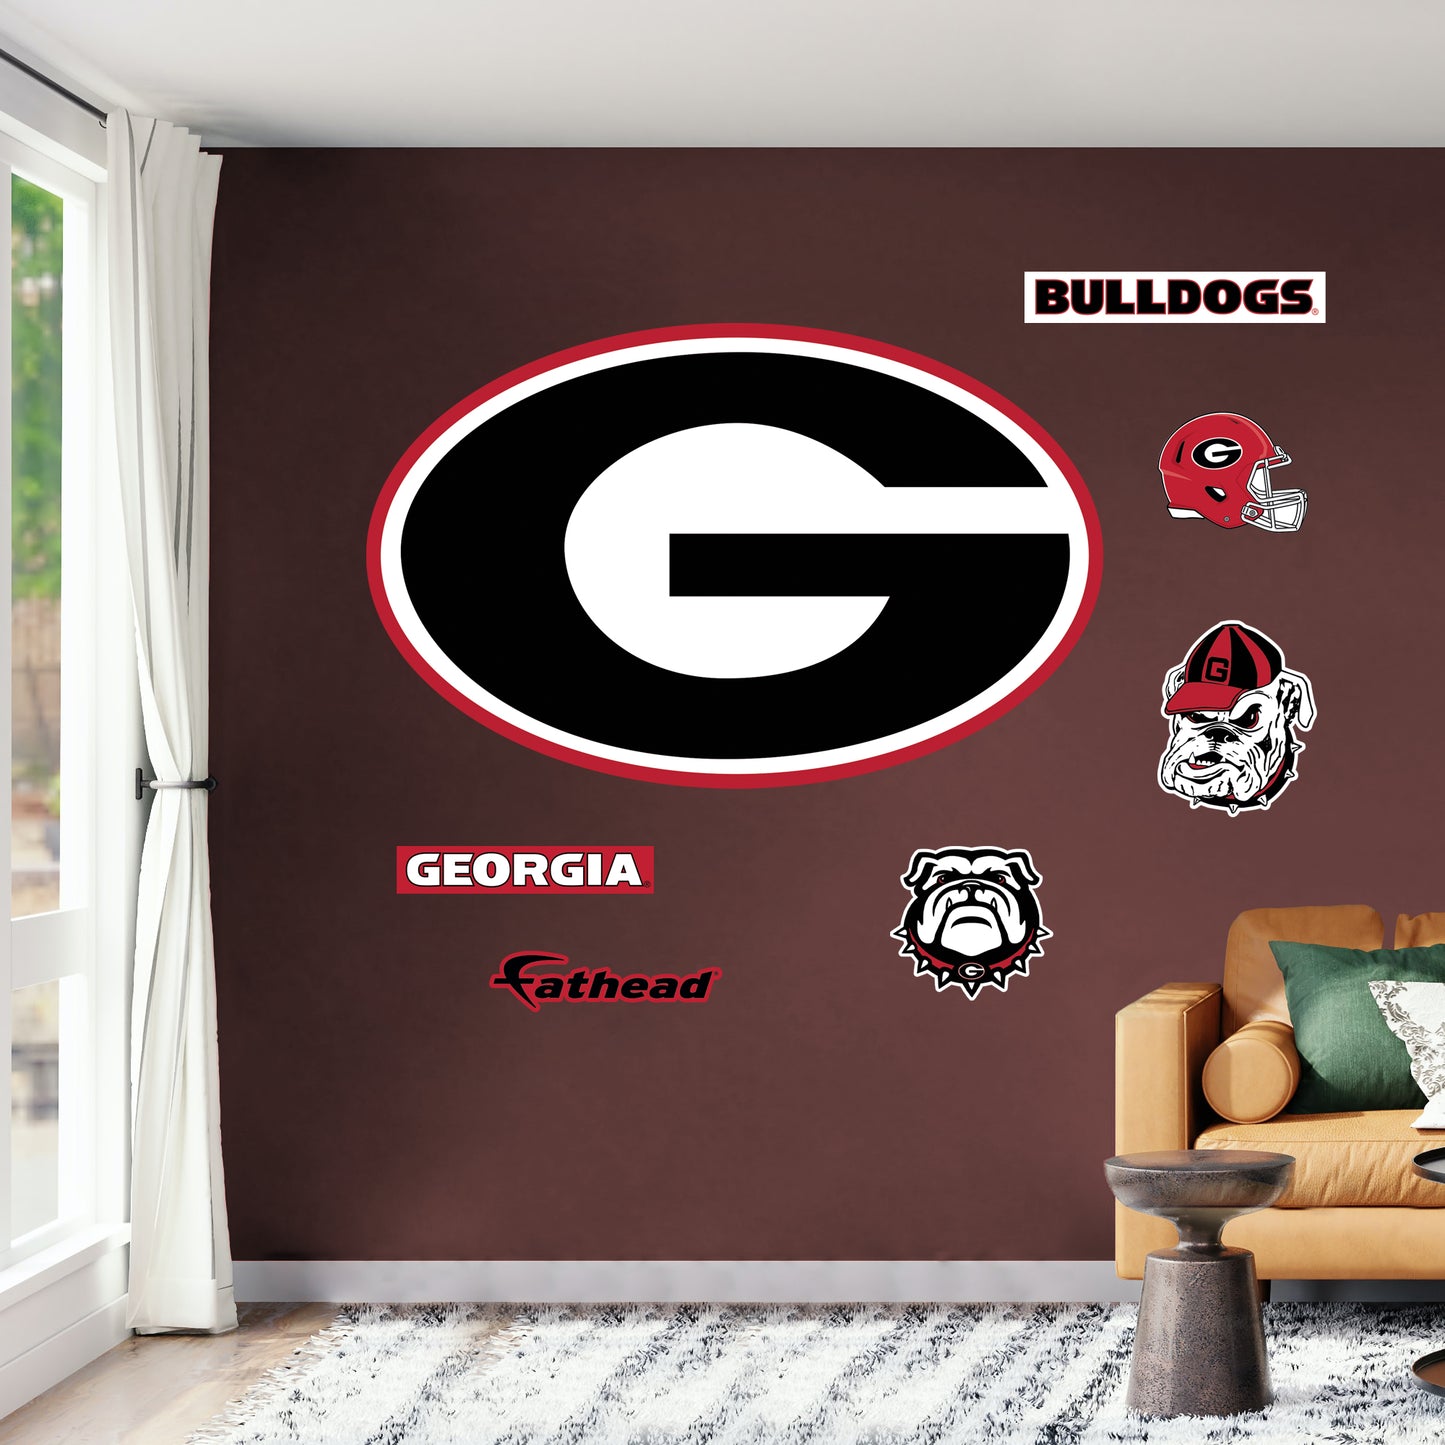 Georgia Bulldogs: G Logo - Officially Licensed NCAA Removable Adhesive Decal